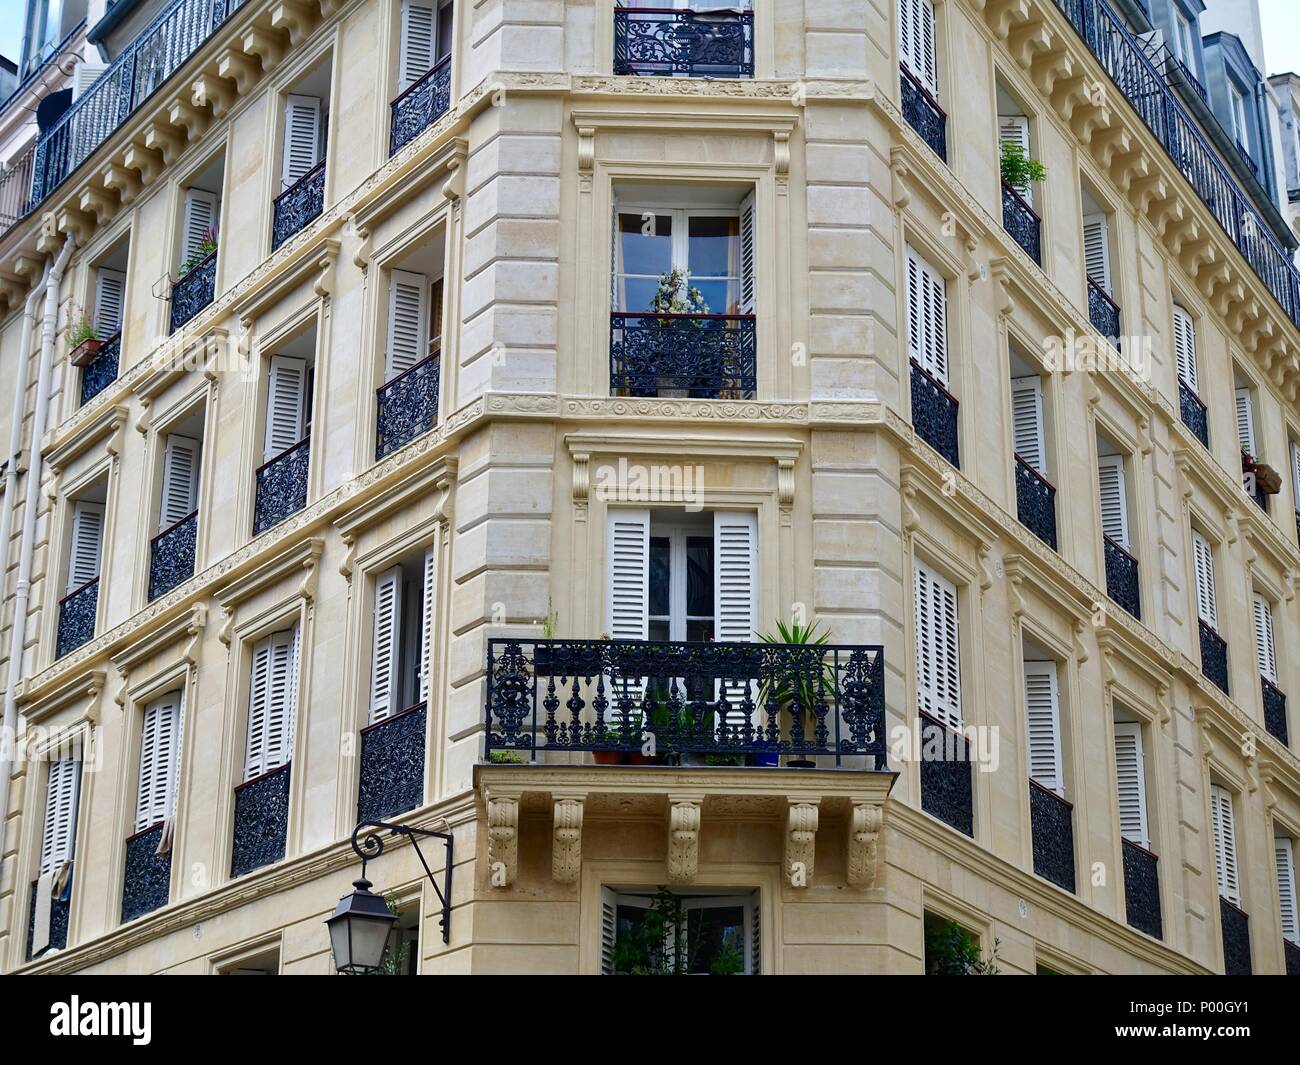 photography Paris stock hi-res Alamy images balcony and -